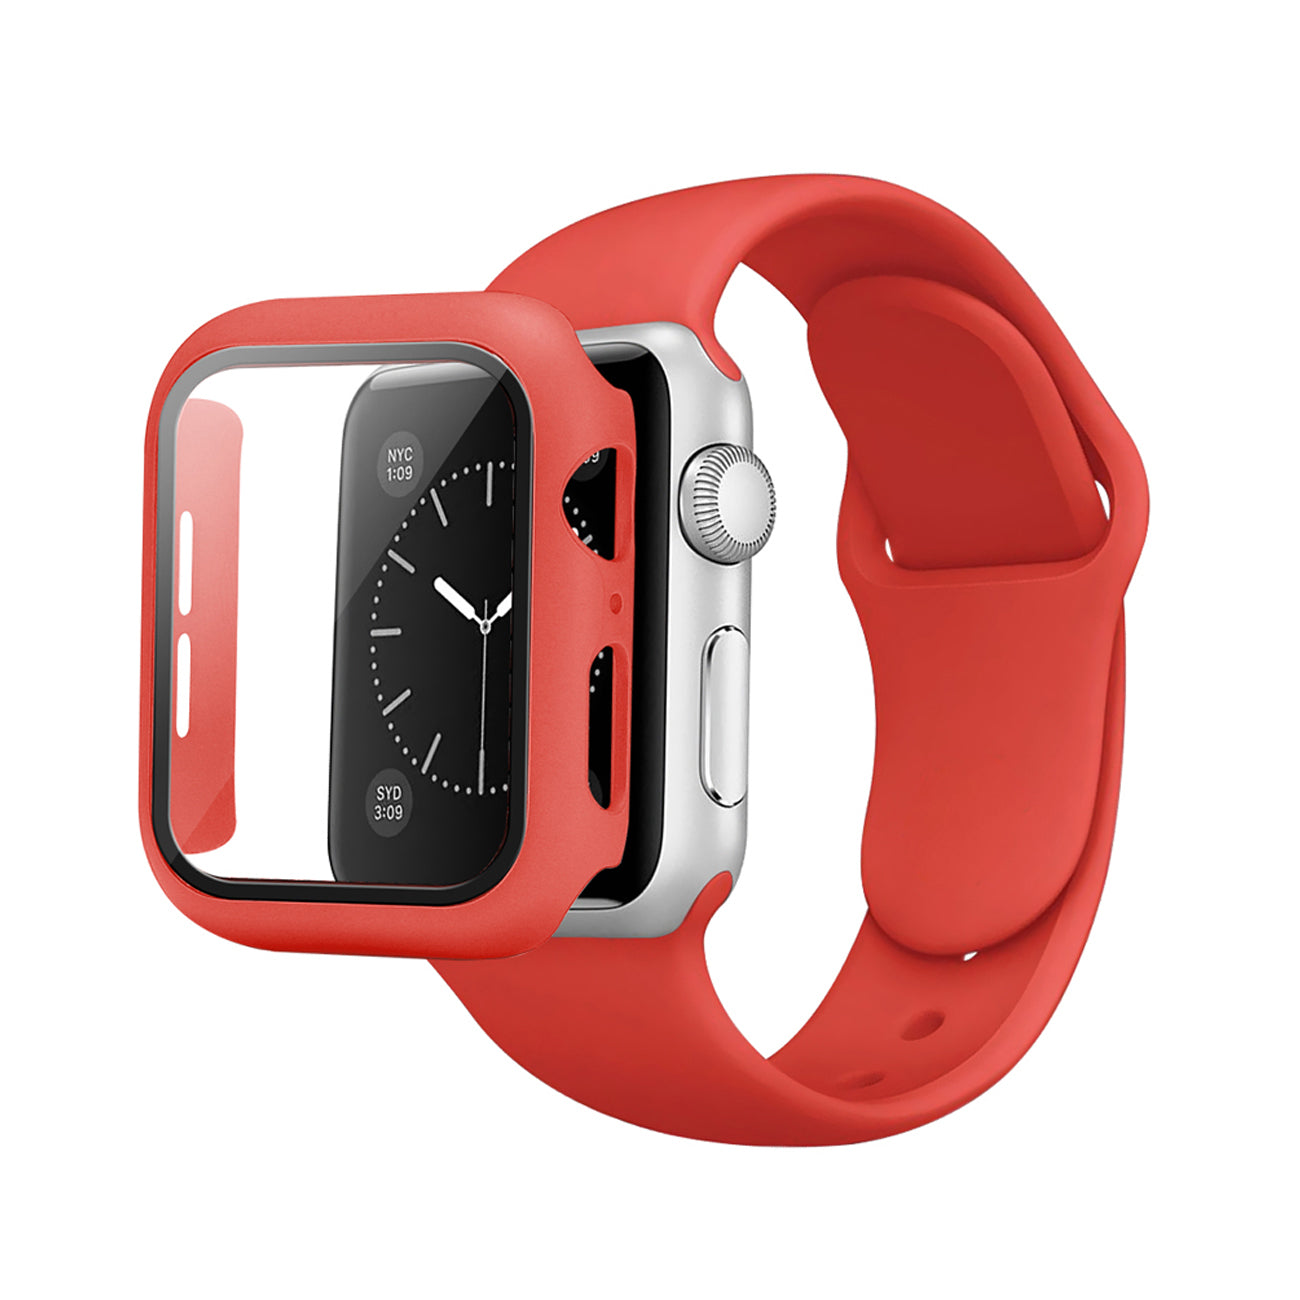 Watch Case PC With Glass Screen Protector, Silicone Watch Band Apple Watch 38mm Red Color